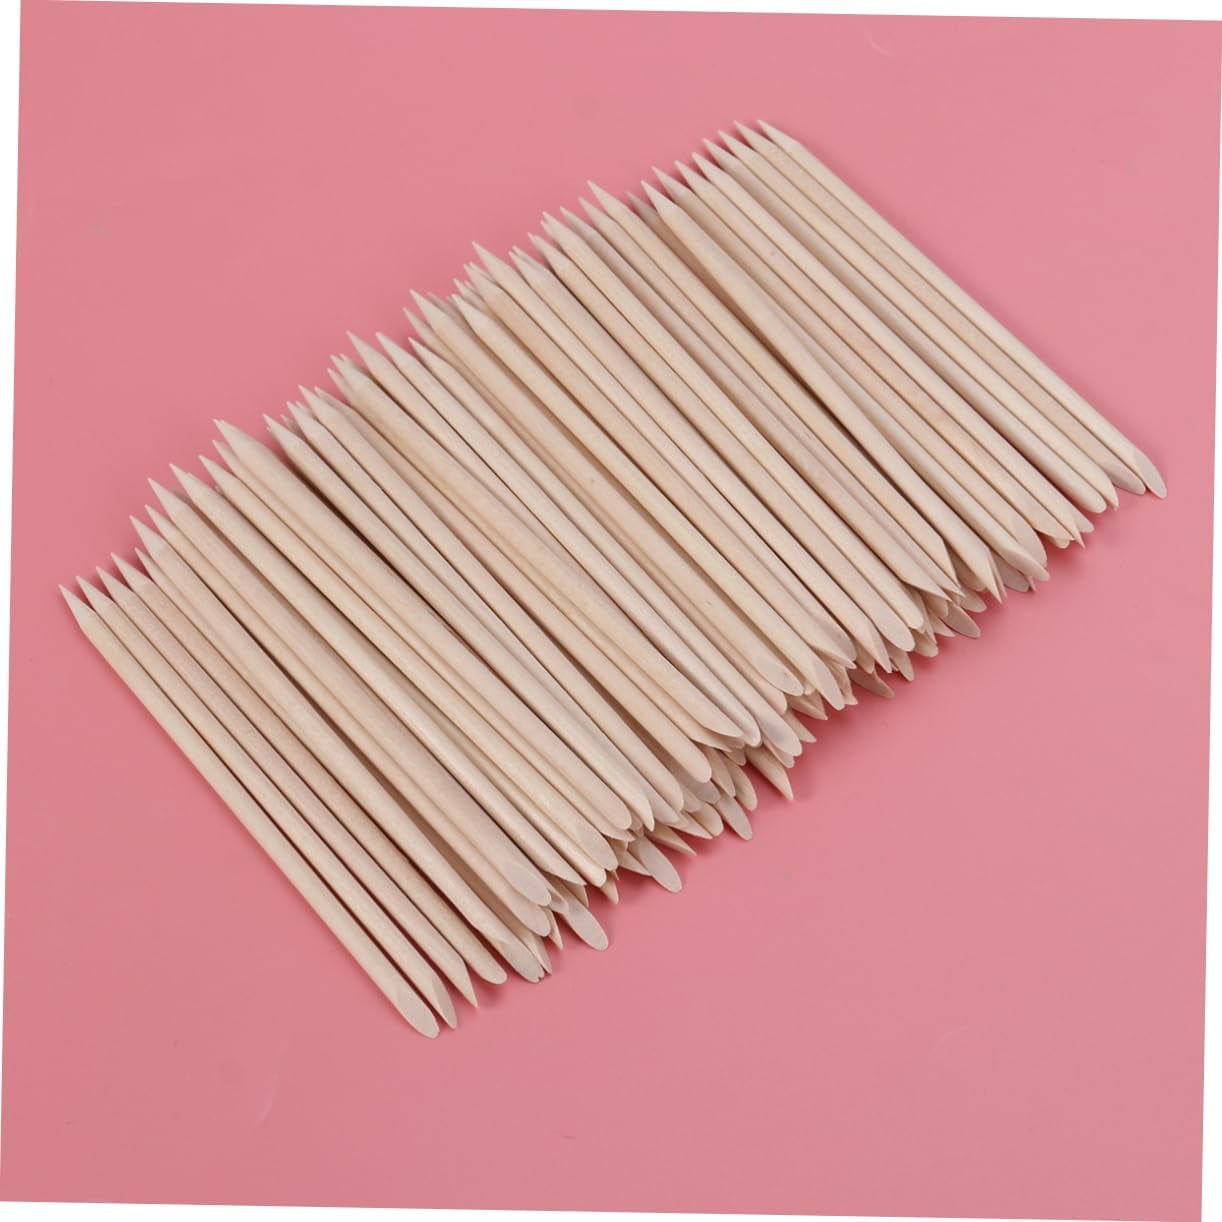 Buy Harapu Premium Nail Art Orange Wood Stick Sticks Cuticle Pusher Remover  Manicure Pedicure Tool, 3 Inch (100 PCS) Online at Lowest Price Ever in  India | Check Reviews & Ratings - Shop The World